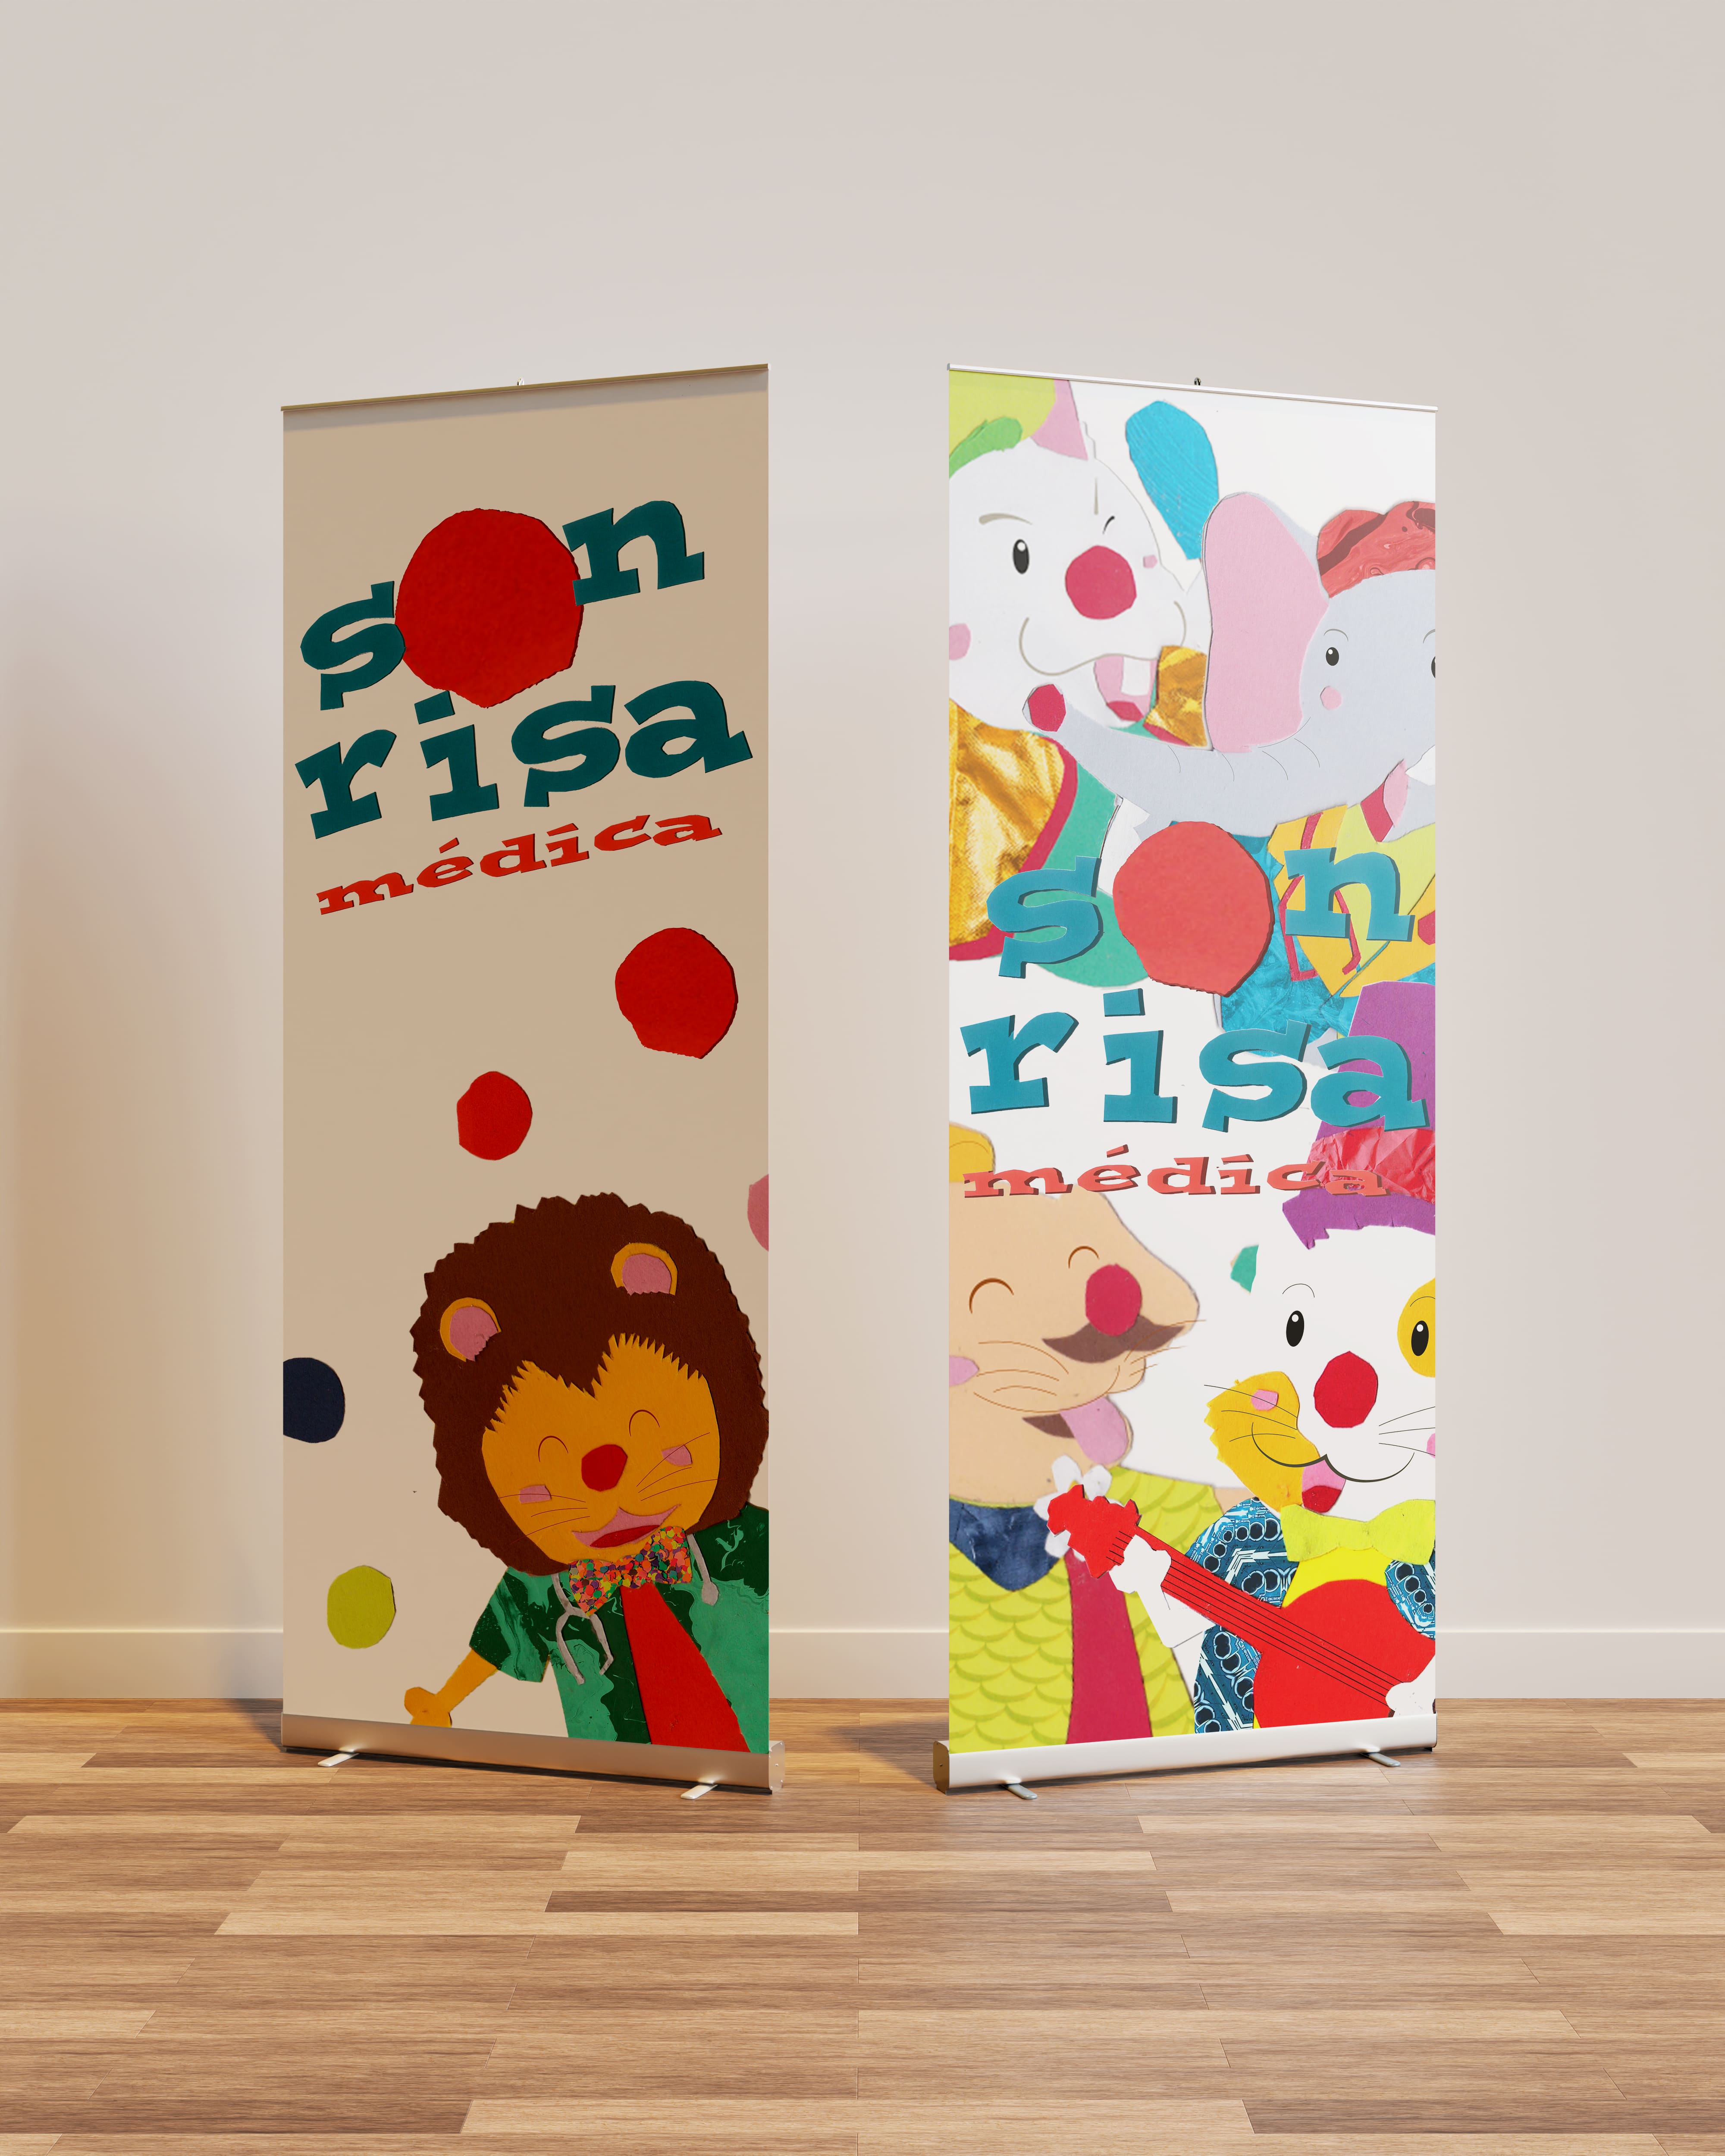 Roll Up infantil by Guillermo Pascual Vich - Creative Work - $i